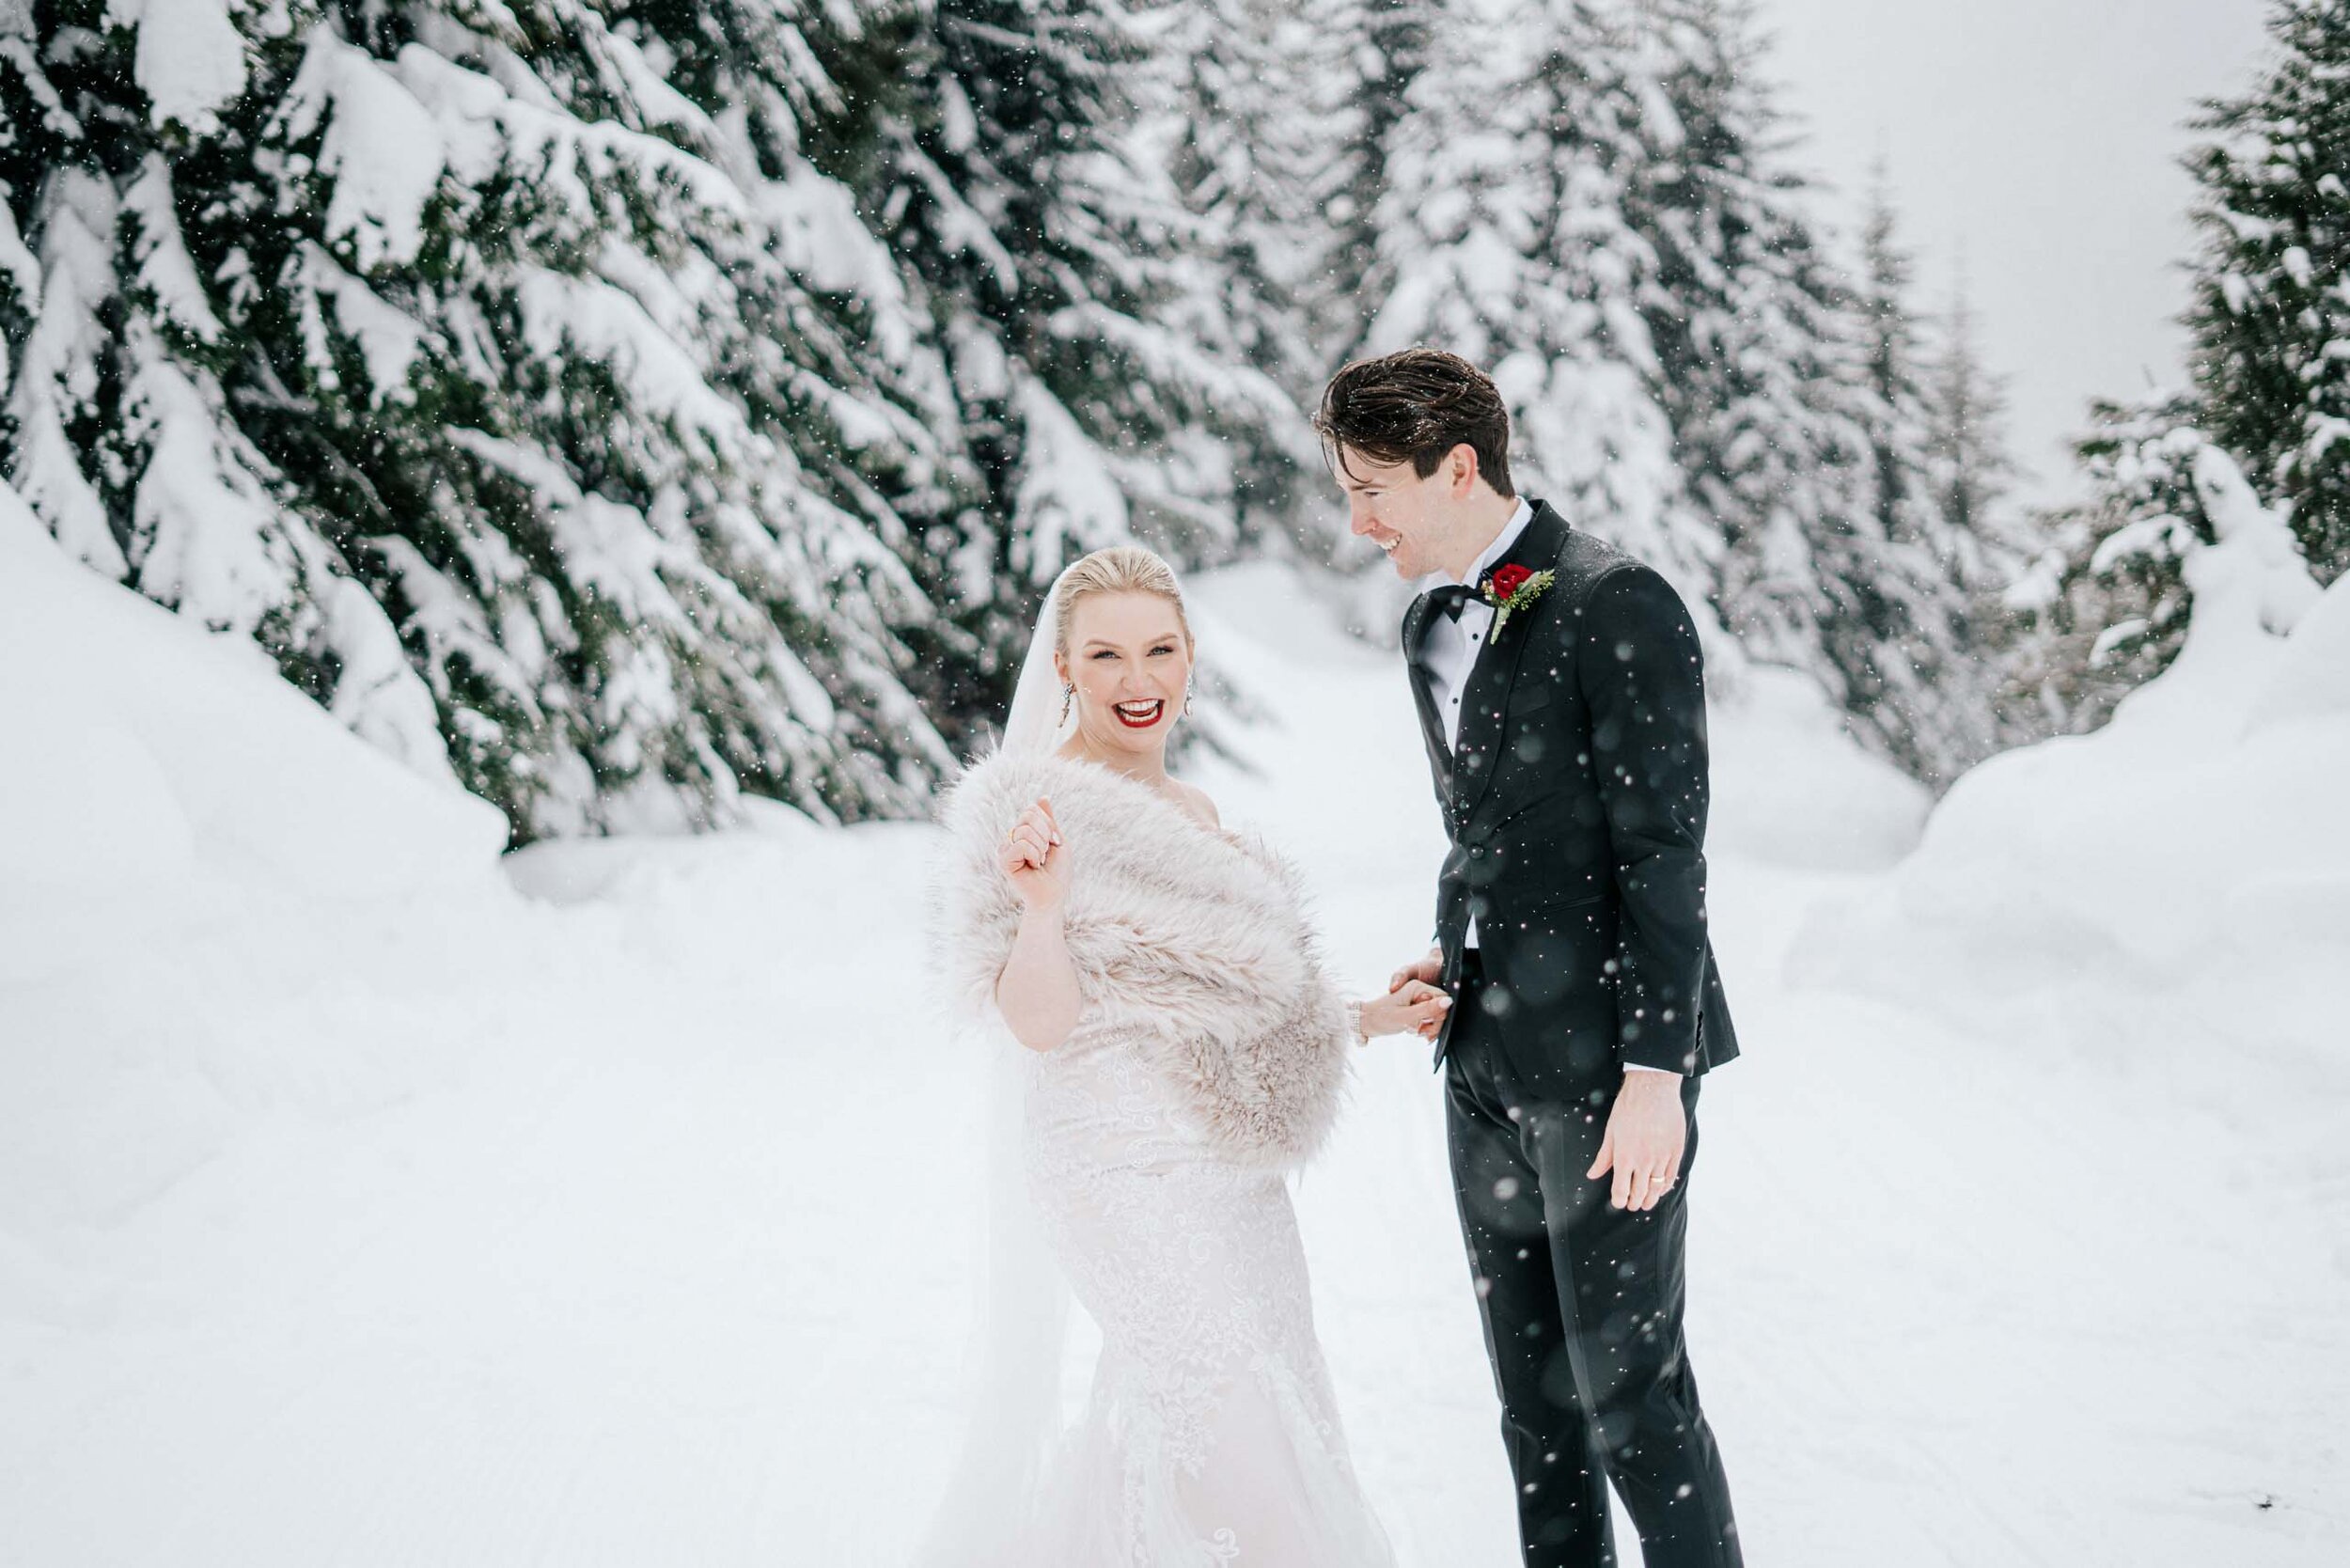 A bride smiles at the camera in the snow as her groom holds her hand and the snow falls.